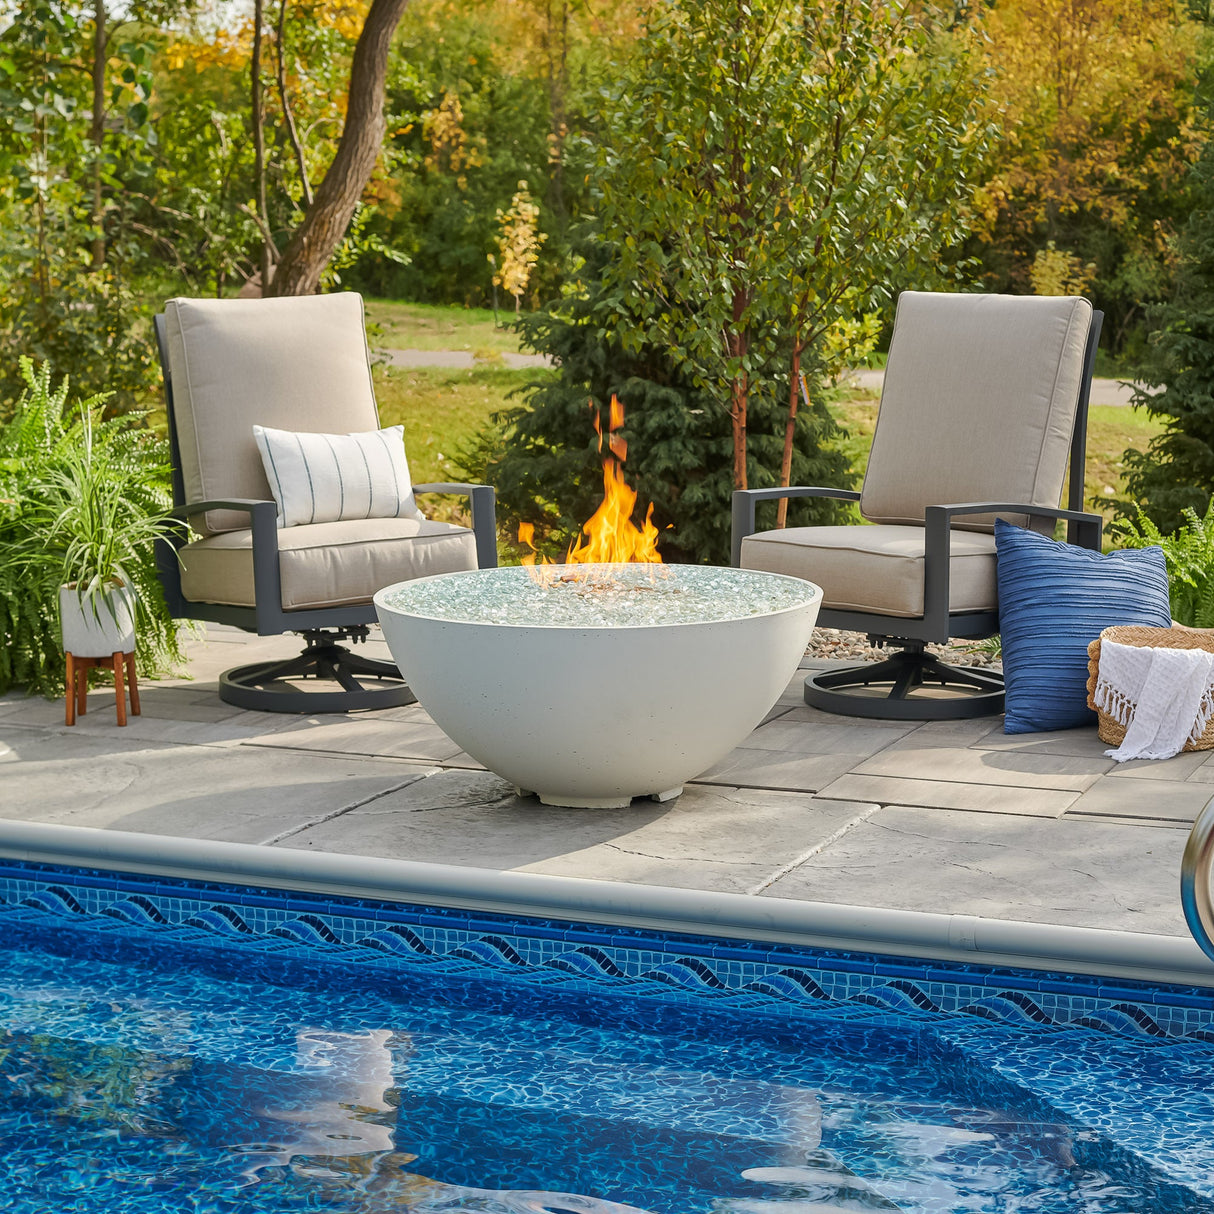 A White Cove Edge Round Gas Fire Pit Bowl 42" next to a pool and lounge chairs